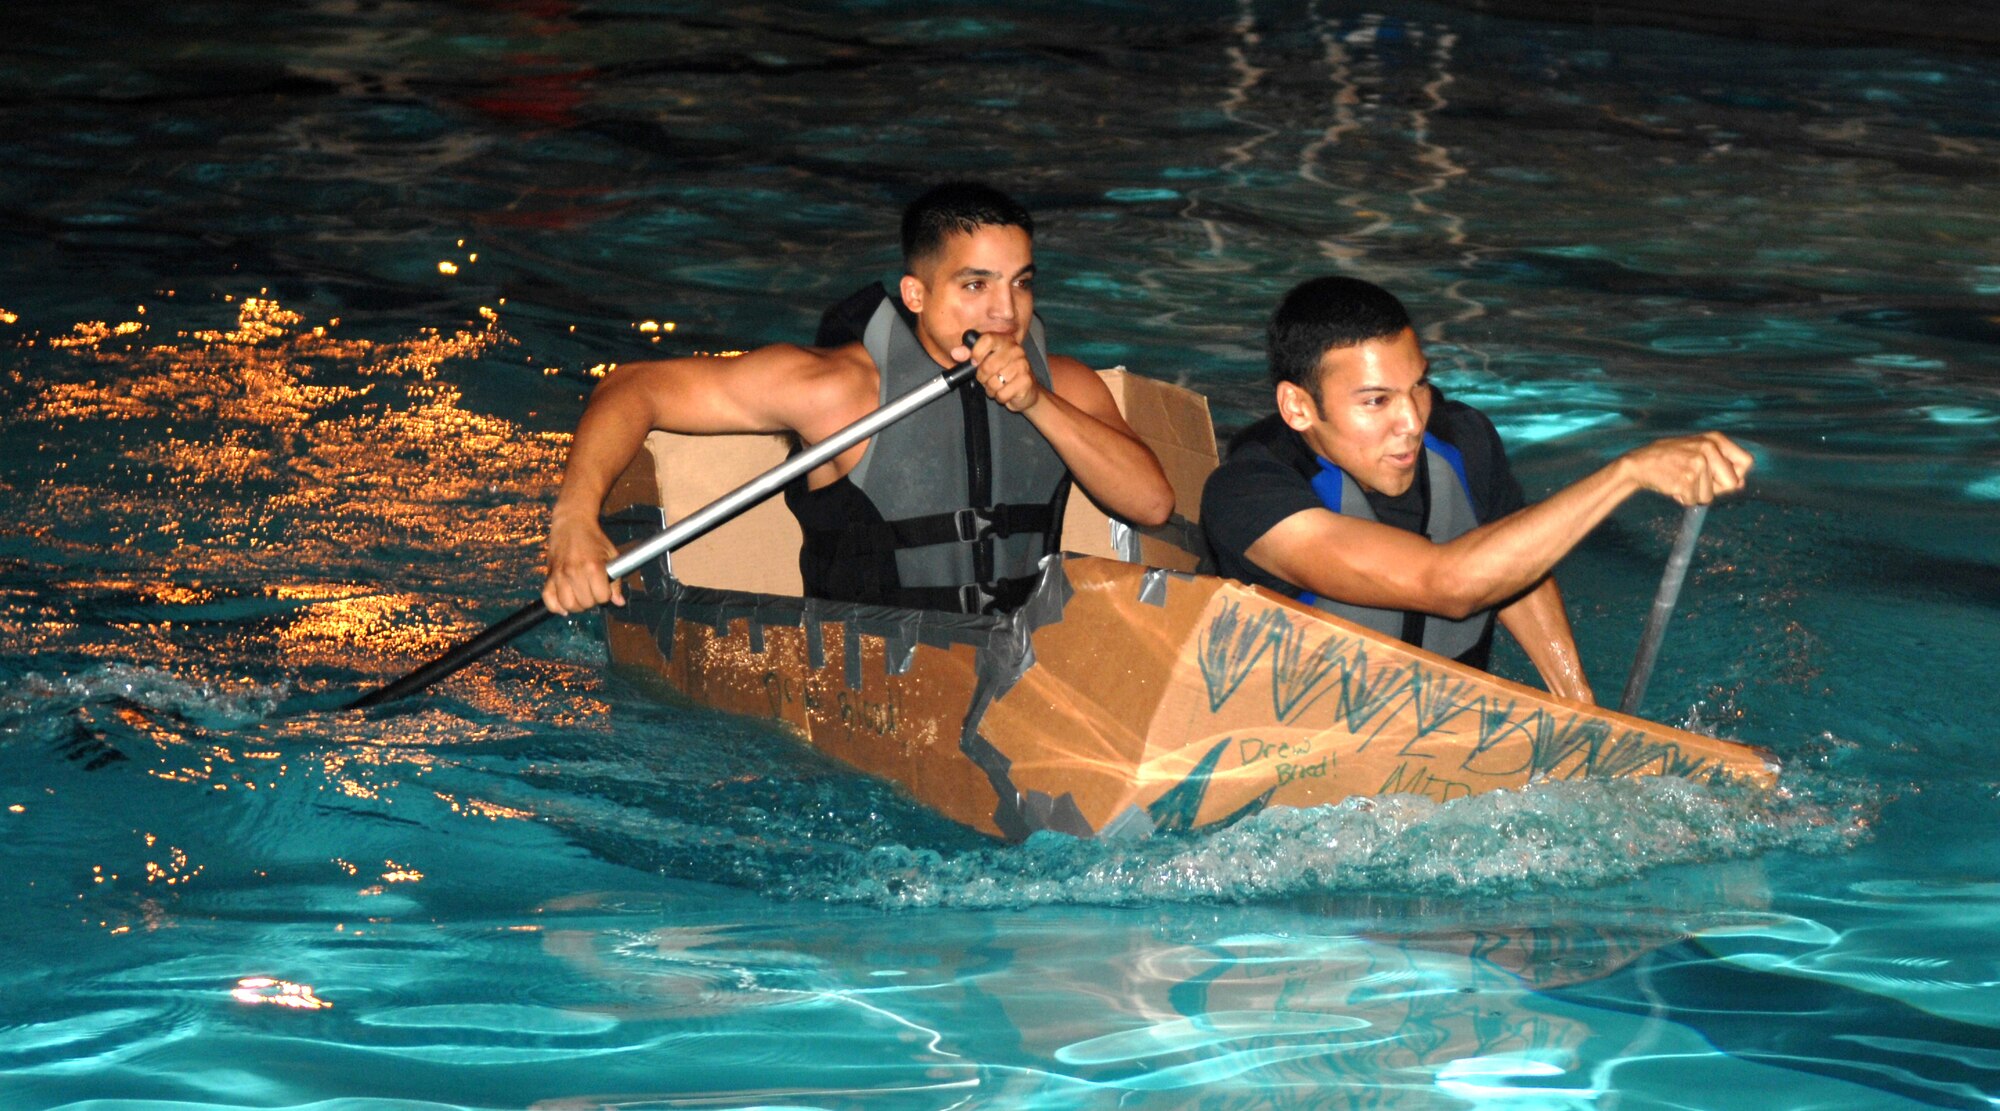 Airman 1st Class Carlos Villegas and Airman 1st Class Broland Johnson from the 4th Medical Operations Squadron race their newly-constructed cardboard boat during the Build-a-Boat competition August 1, 2008, Seymour Johnson Air Force Base, North Carolina. The Build-a-Boat competition's purpose was to boost morale and help Airman meet other Airman. (U.S. Air Force photo by Airman 1st Class Gino Reyes) 